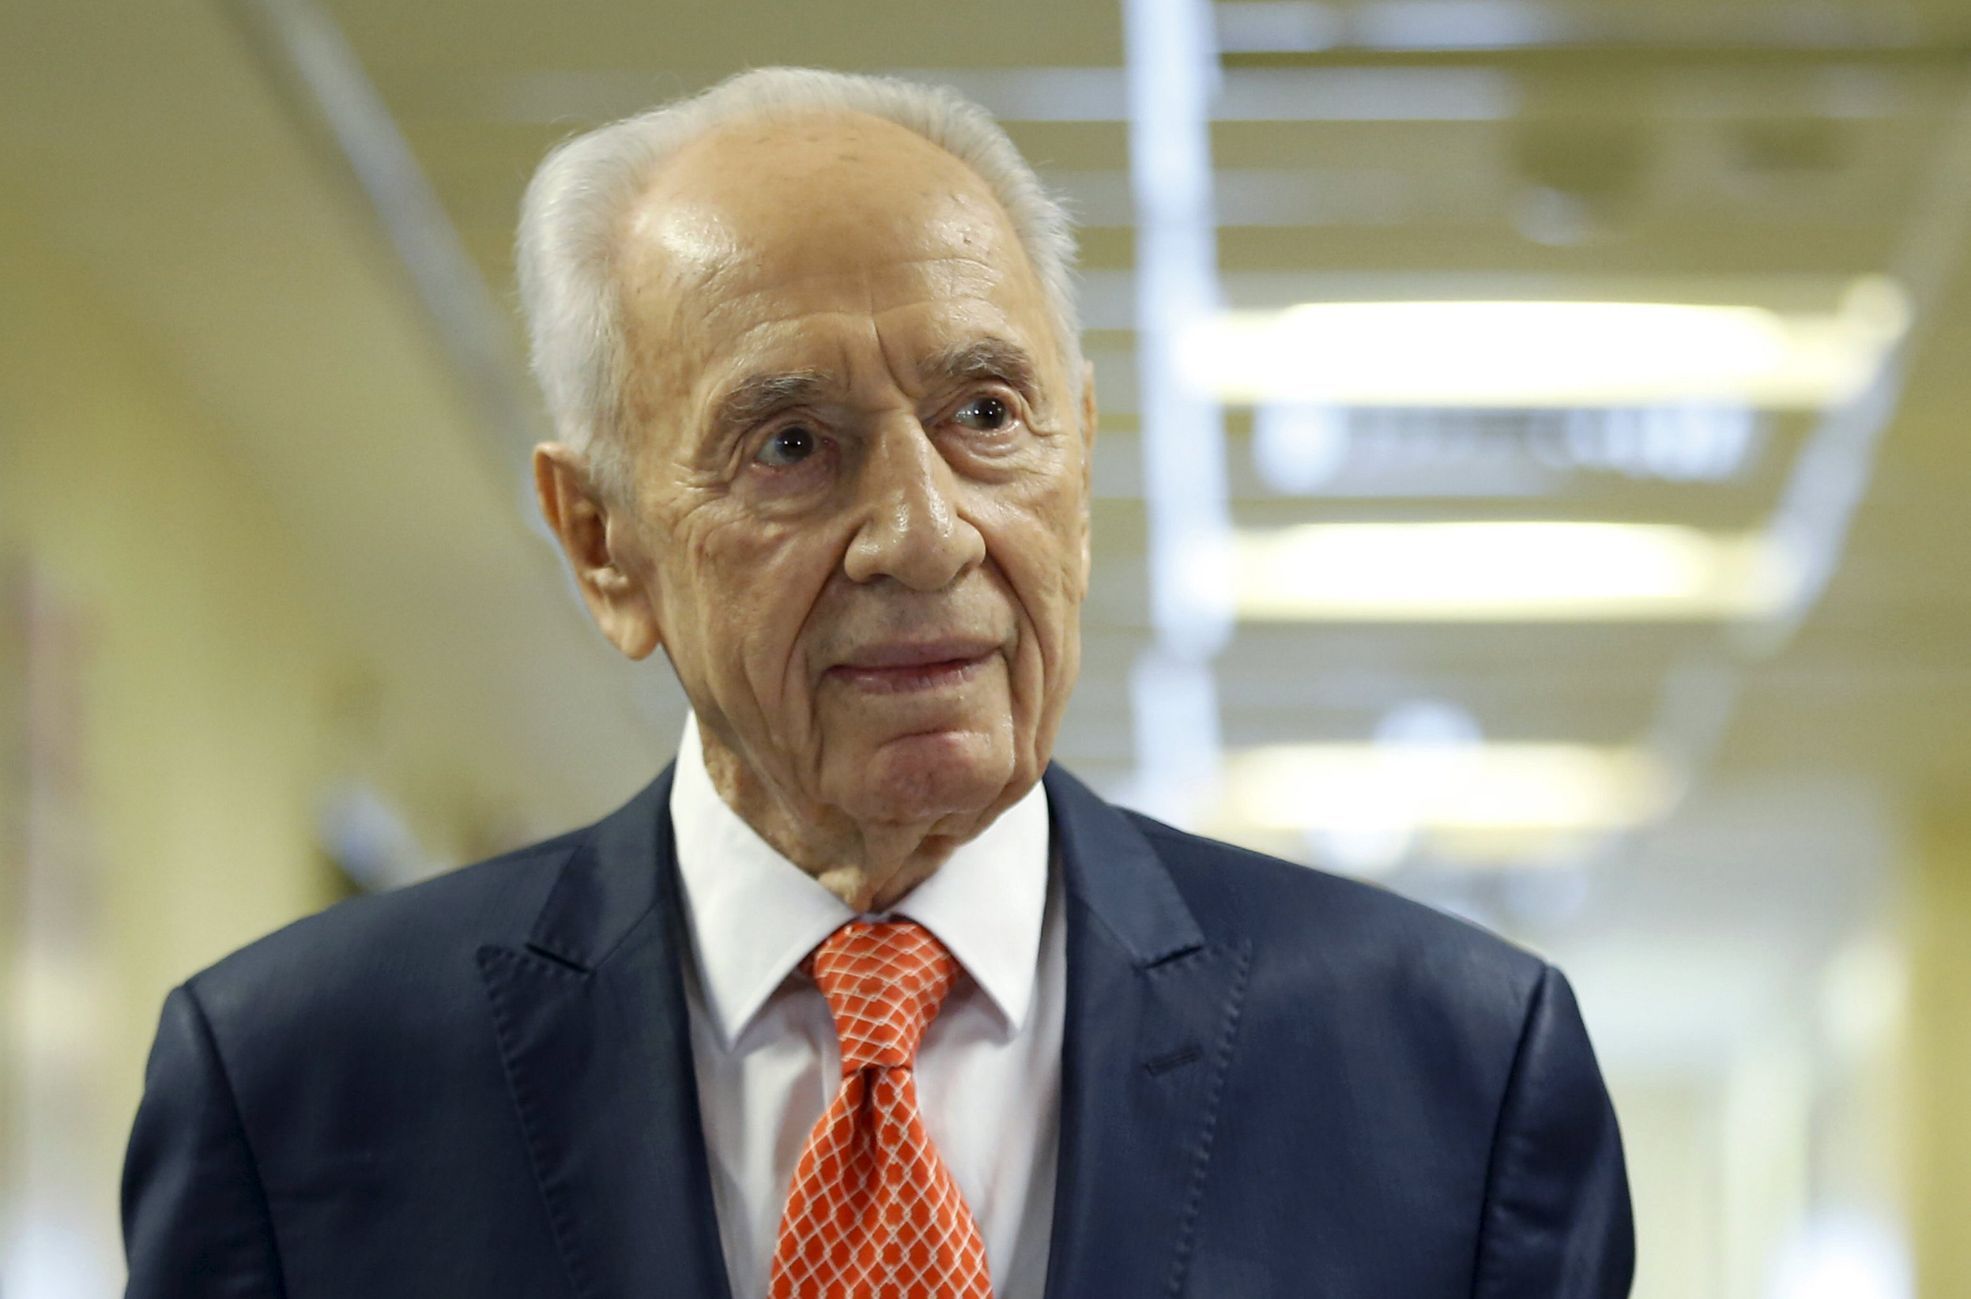 Former Israeli President Peres delivers a statement to the media as he is discharged from a hospital near Tel Aviv